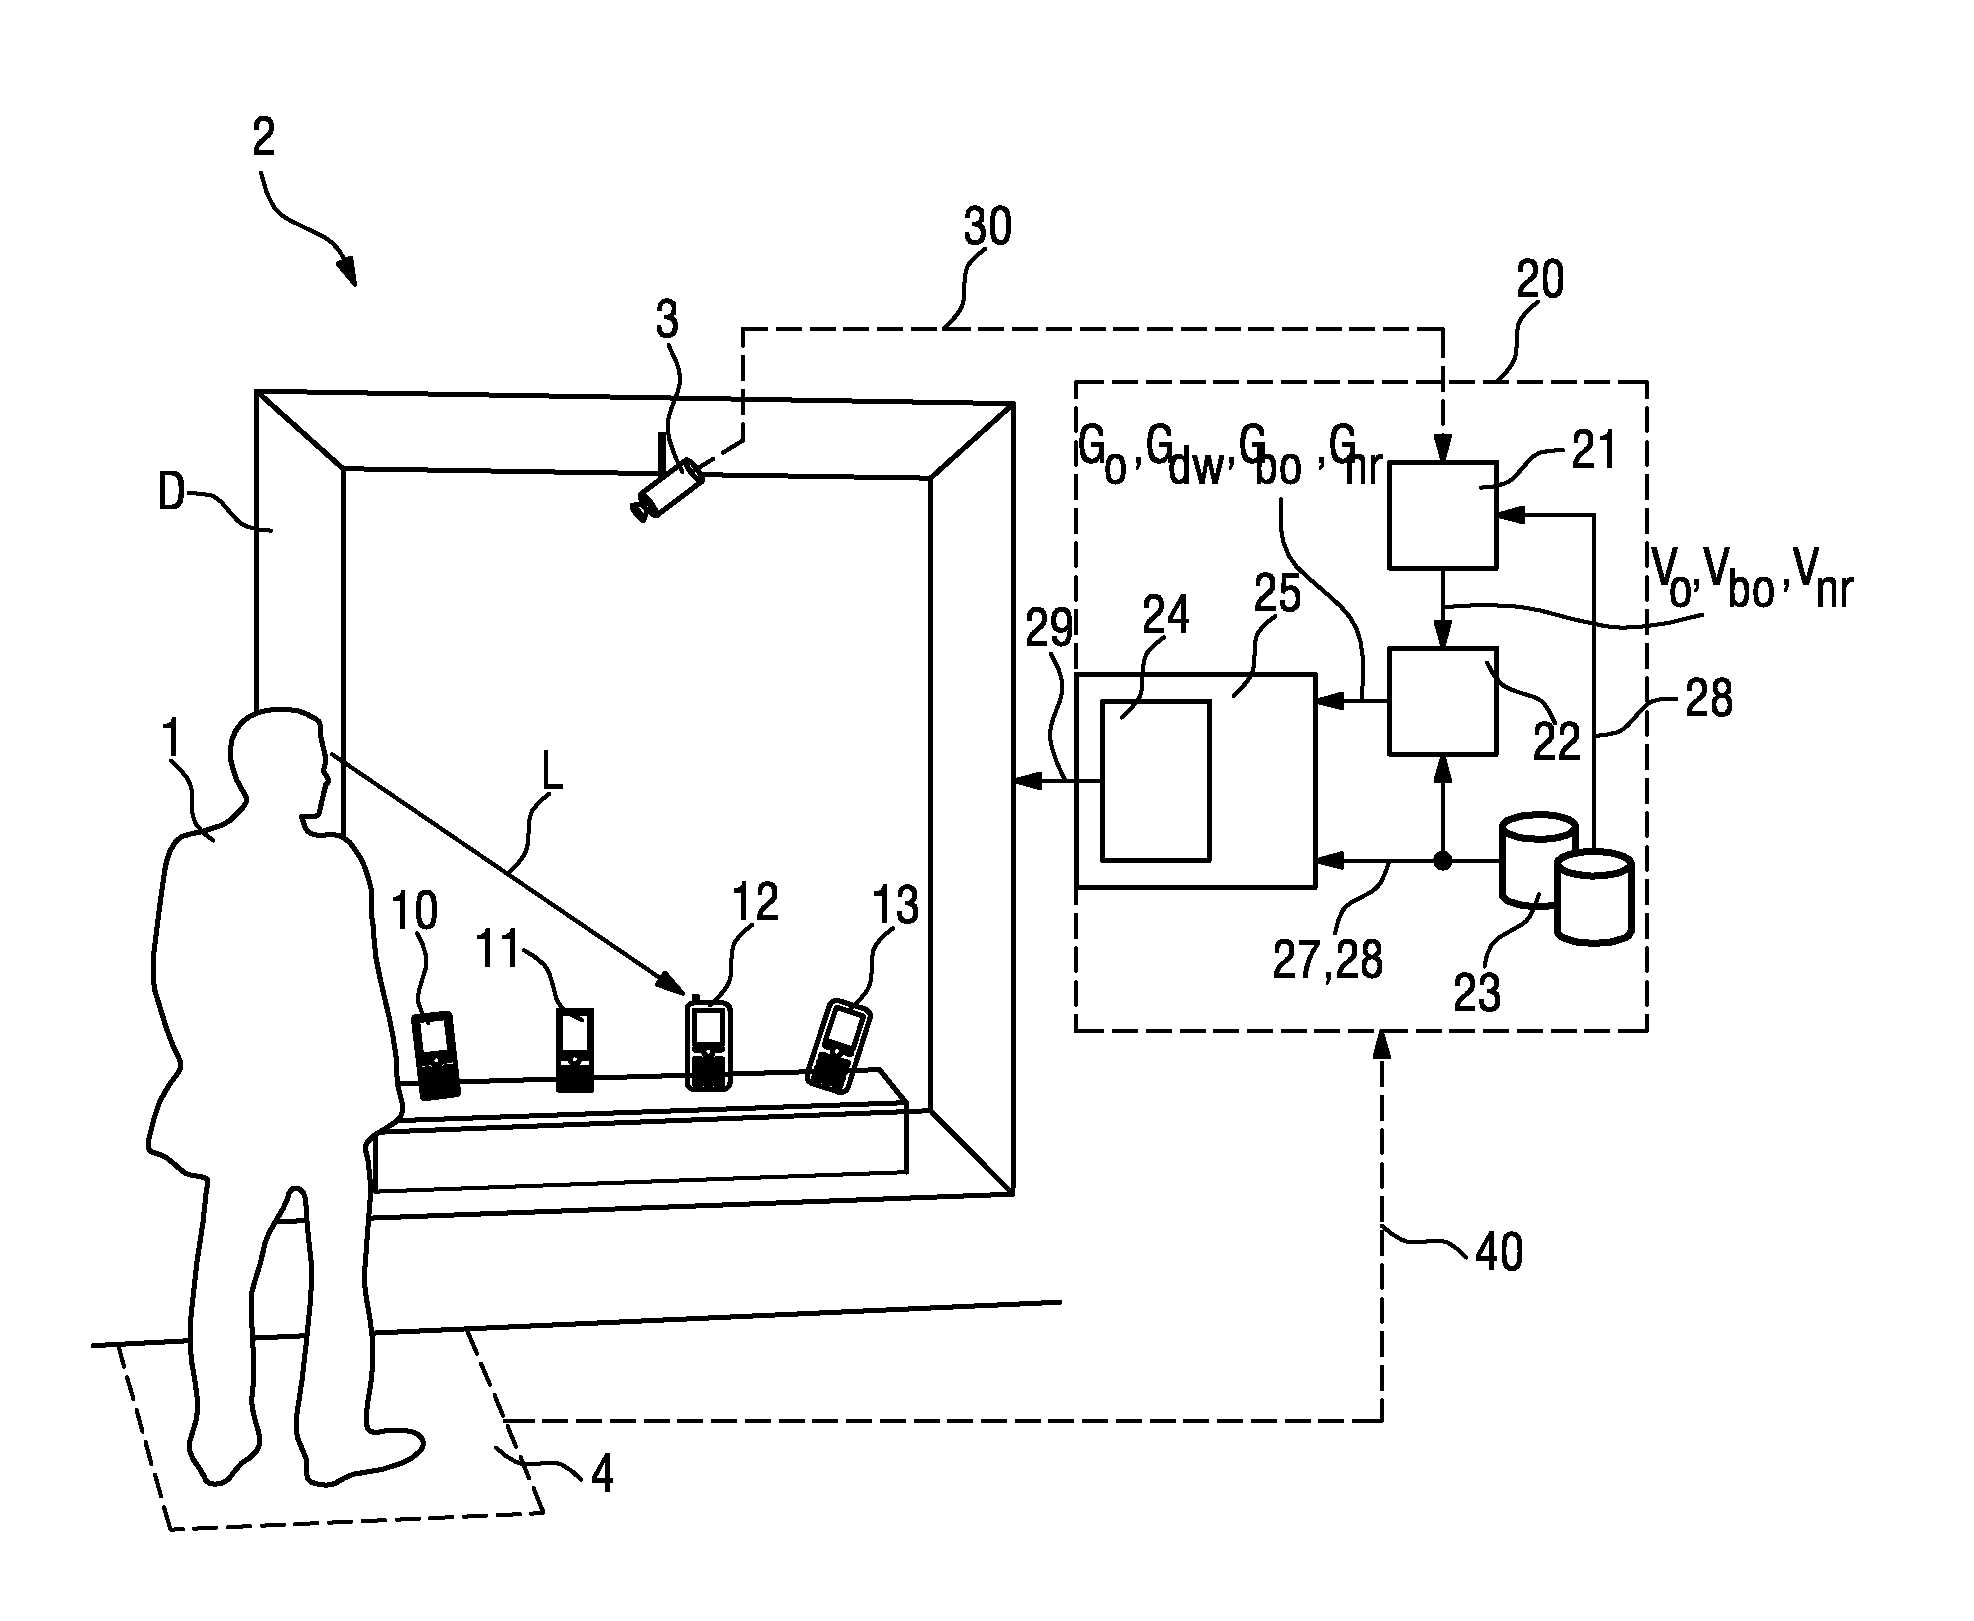 Method of performing a gaze-based interaction between a user and an interactive display system